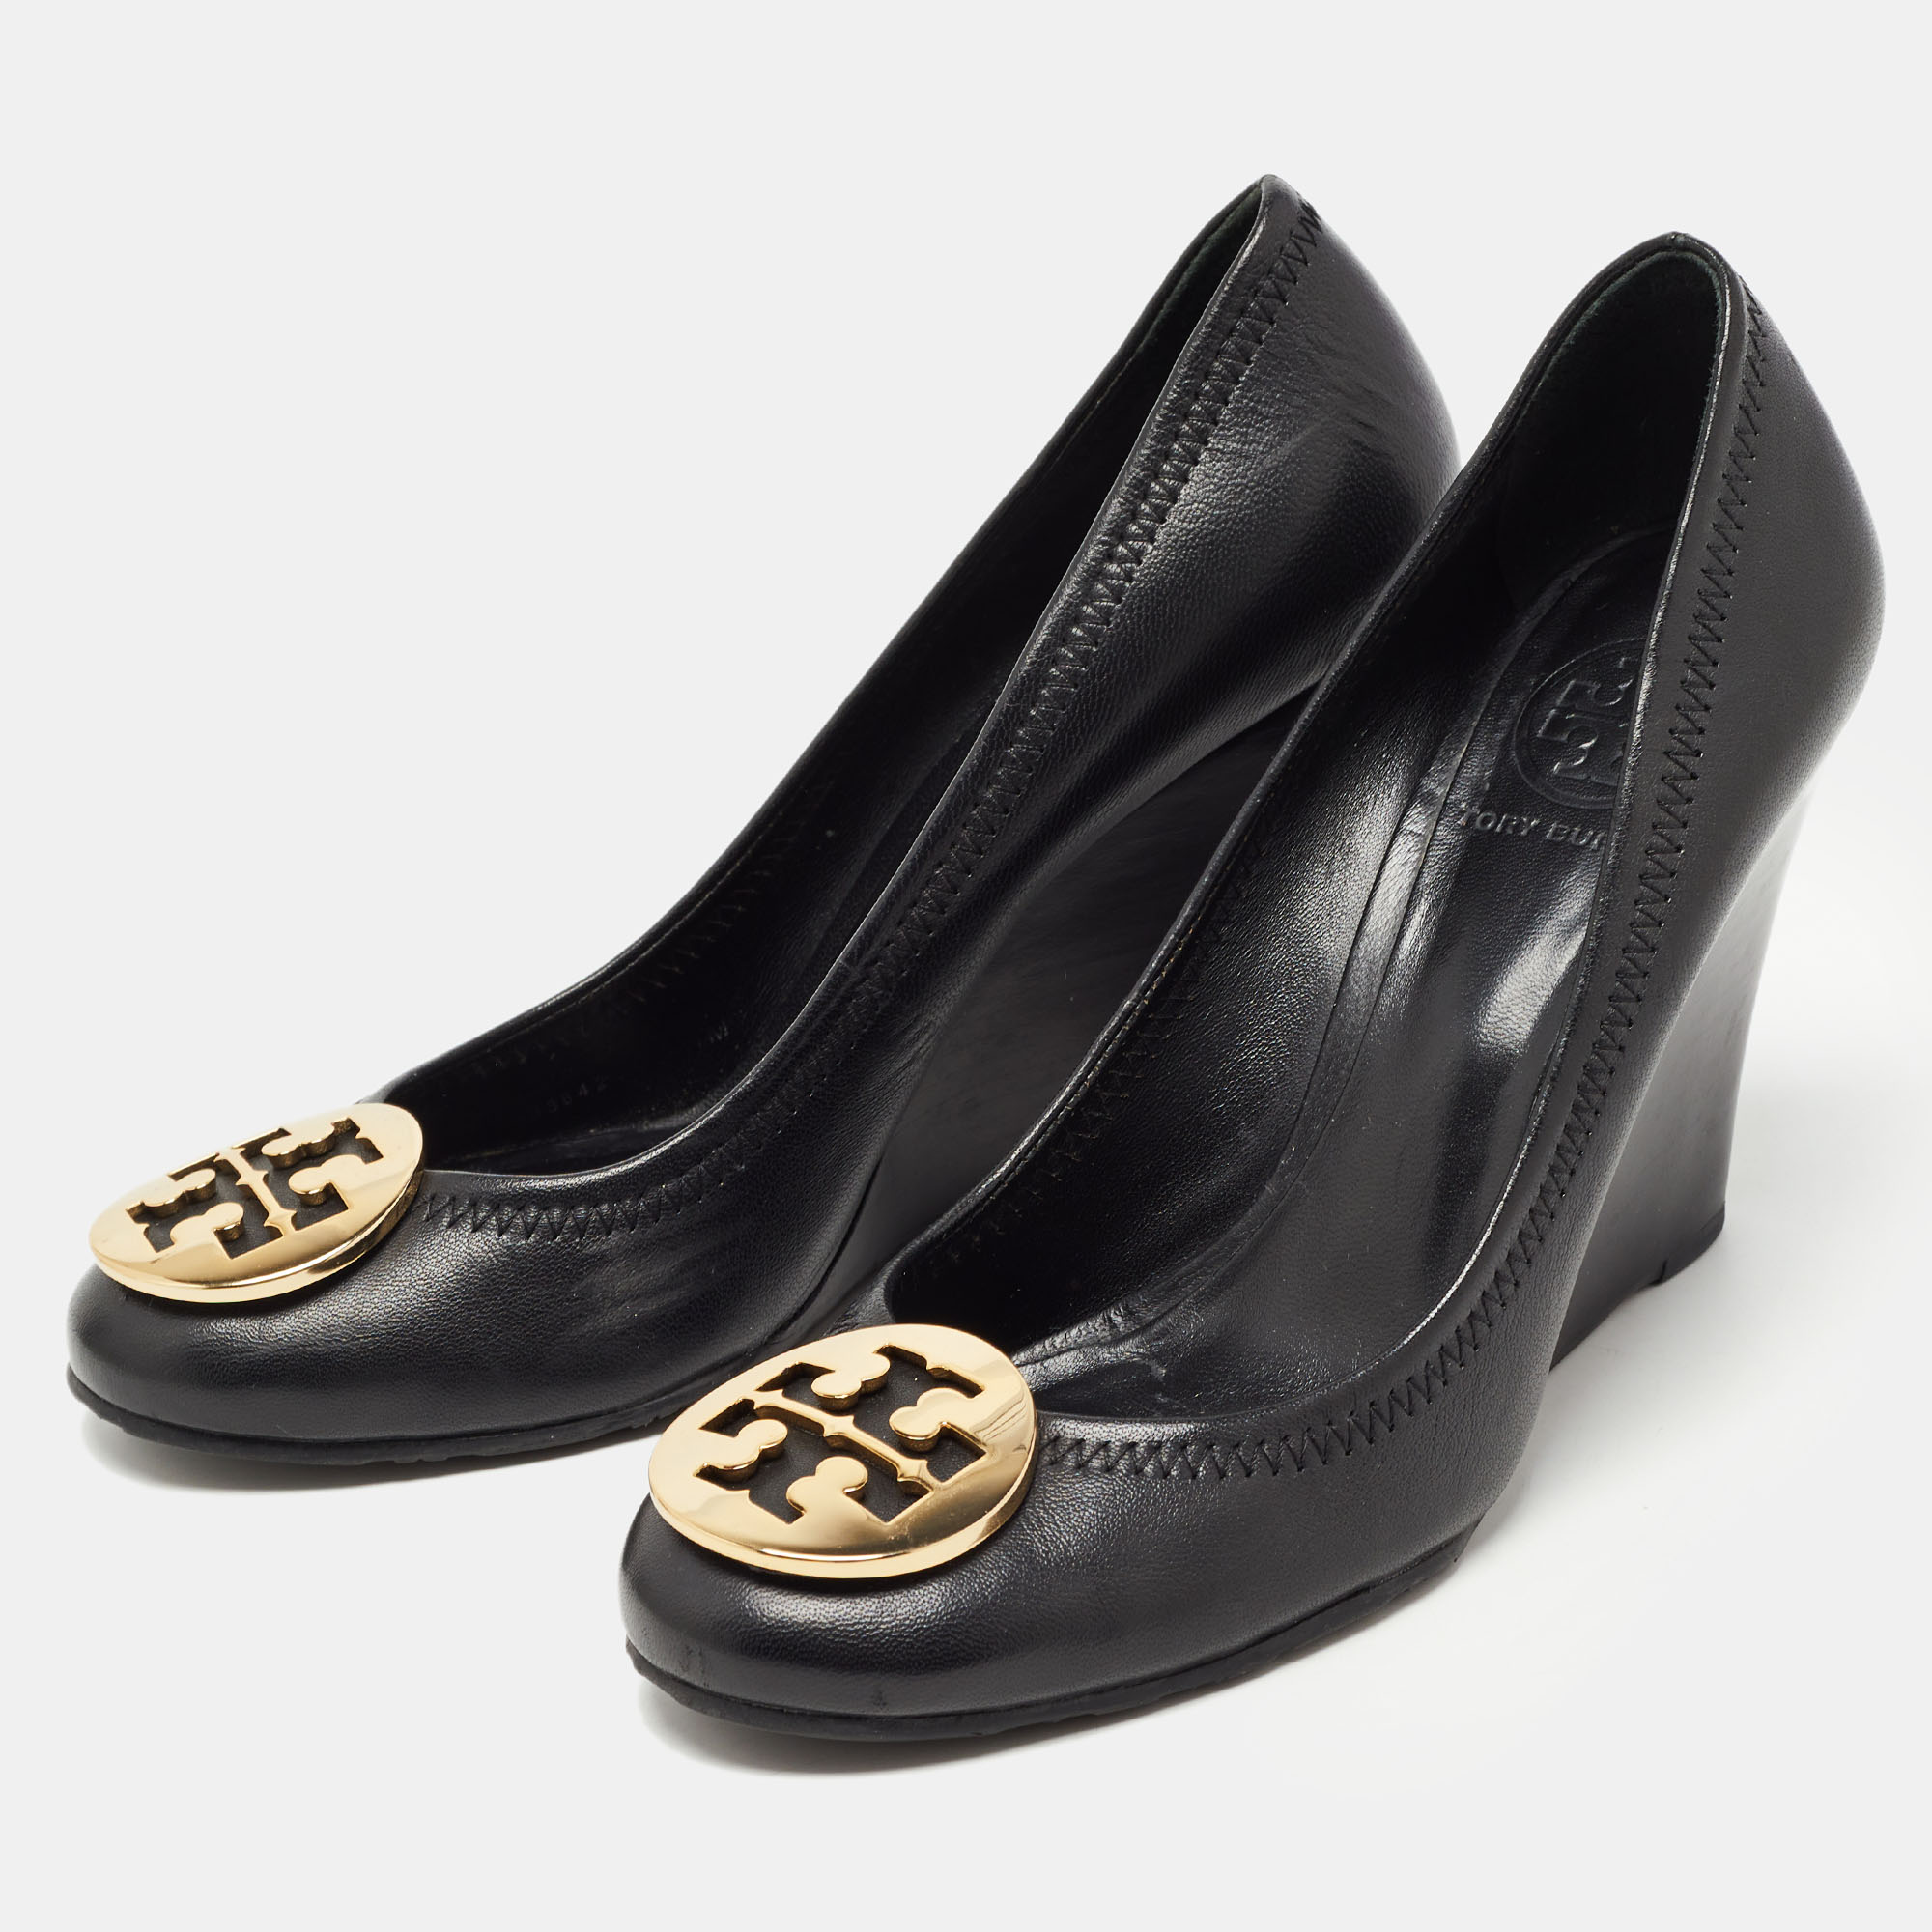 

Tory Burch Black Leather Sally Wedge Pumps Size